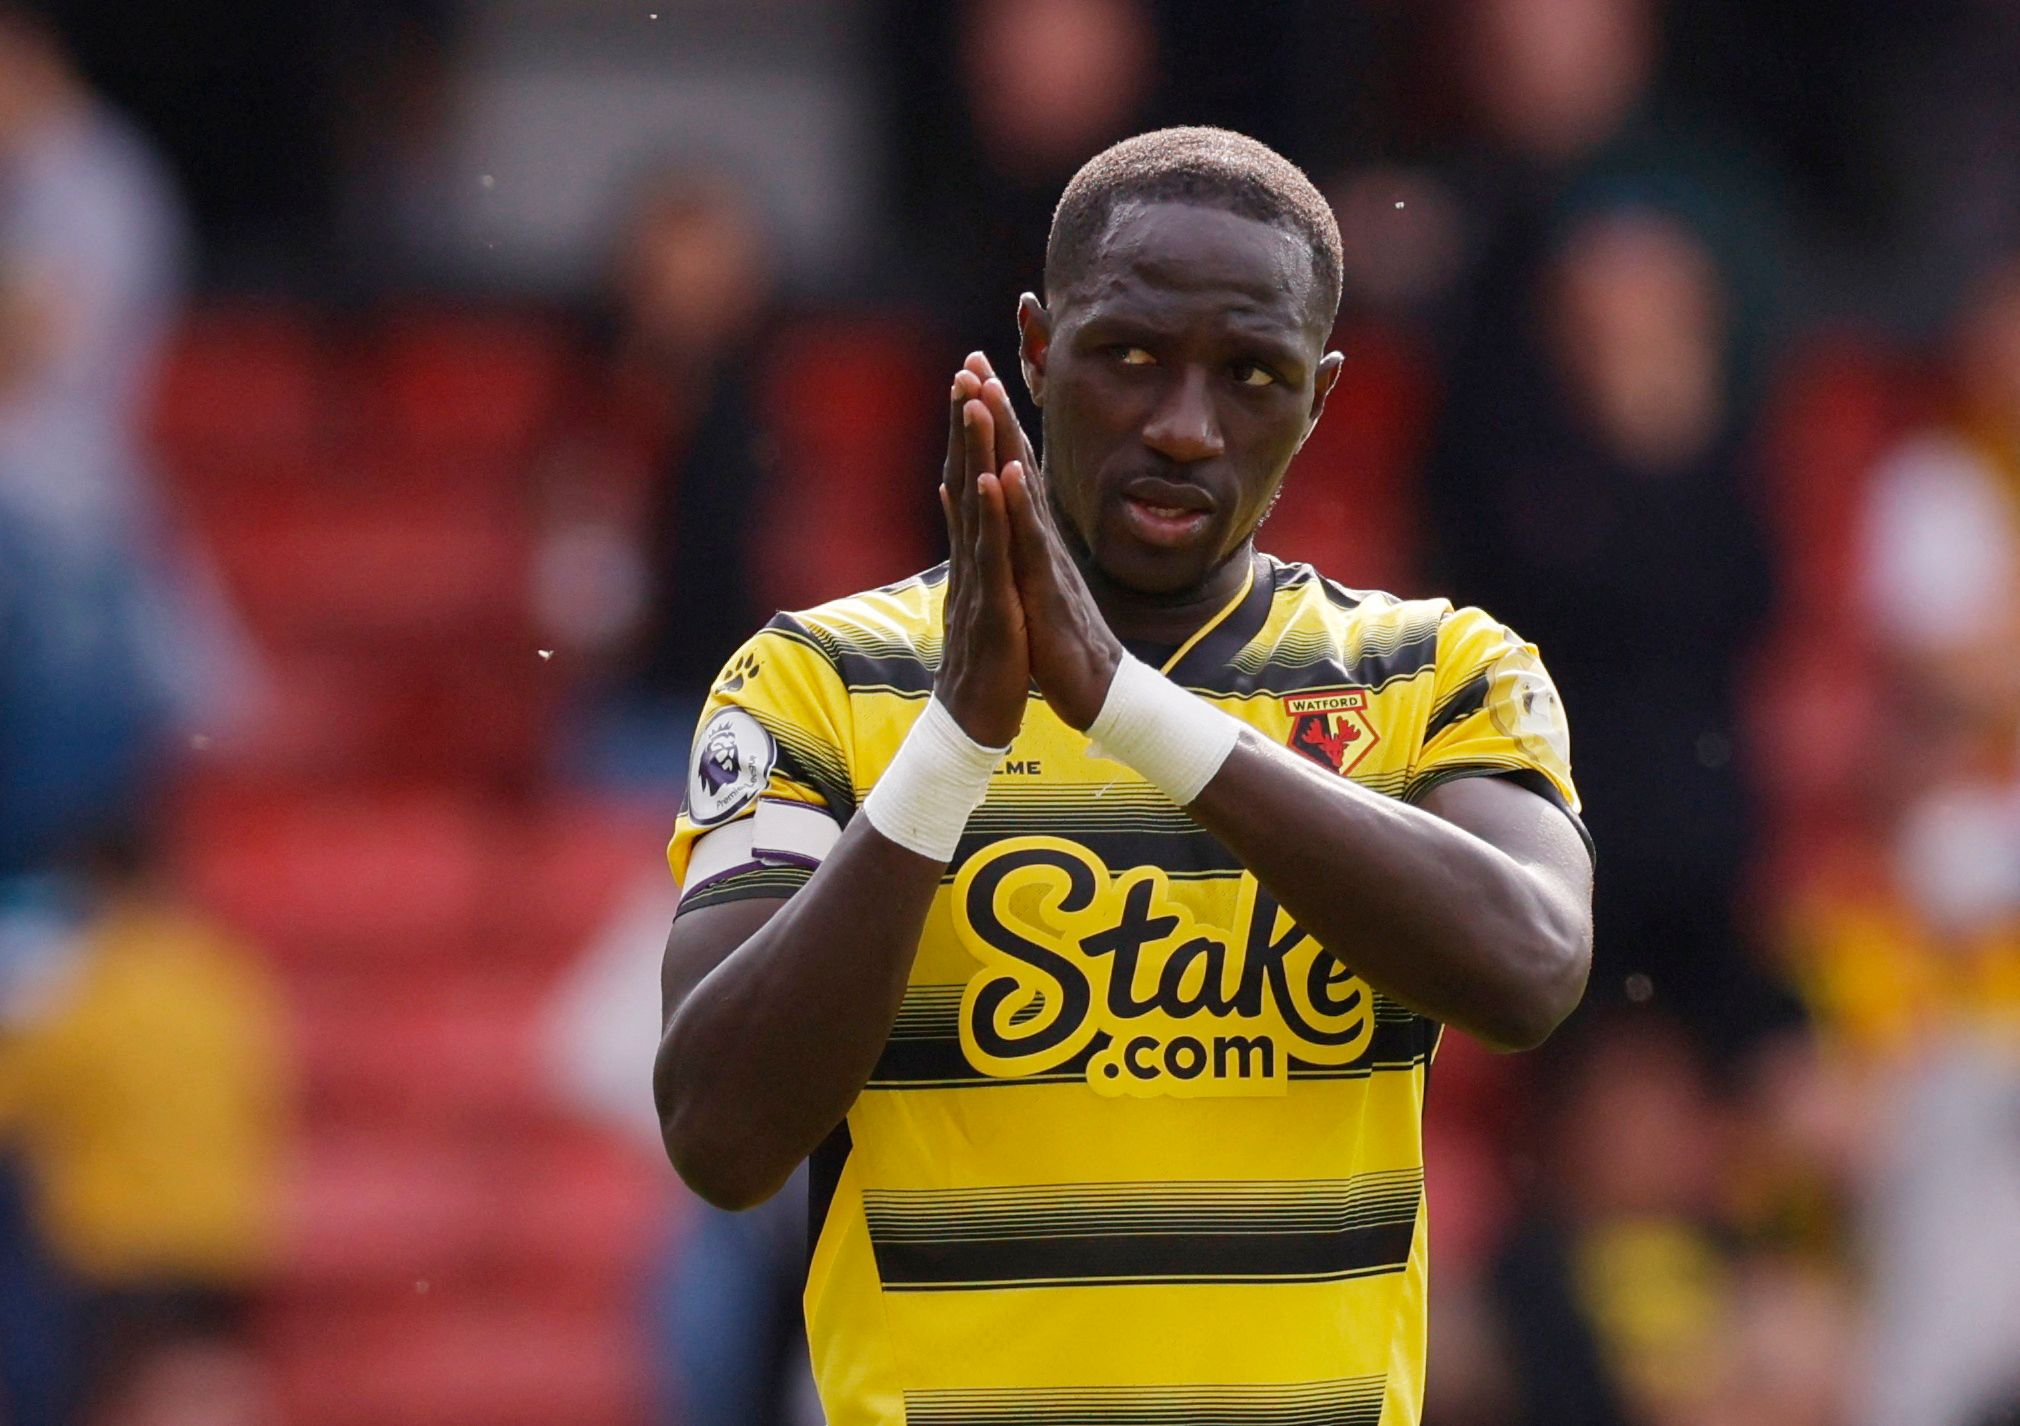 Soccer Football - Premier League - Watford v Burnley - Vicarage Road, Watford, Britain - April 30, 2022 Watford's Moussa Sissoko applauds the fans after the match Action Images via Reuters/Andrew Couldridge EDITORIAL USE ONLY. No use with unauthorized audio, video, data, fixture lists, club/league logos or 'live' services. Online in-match use limited to 75 images, no video emulation. No use in betting, games or single club /league/player publications.  Please contact your account representative 